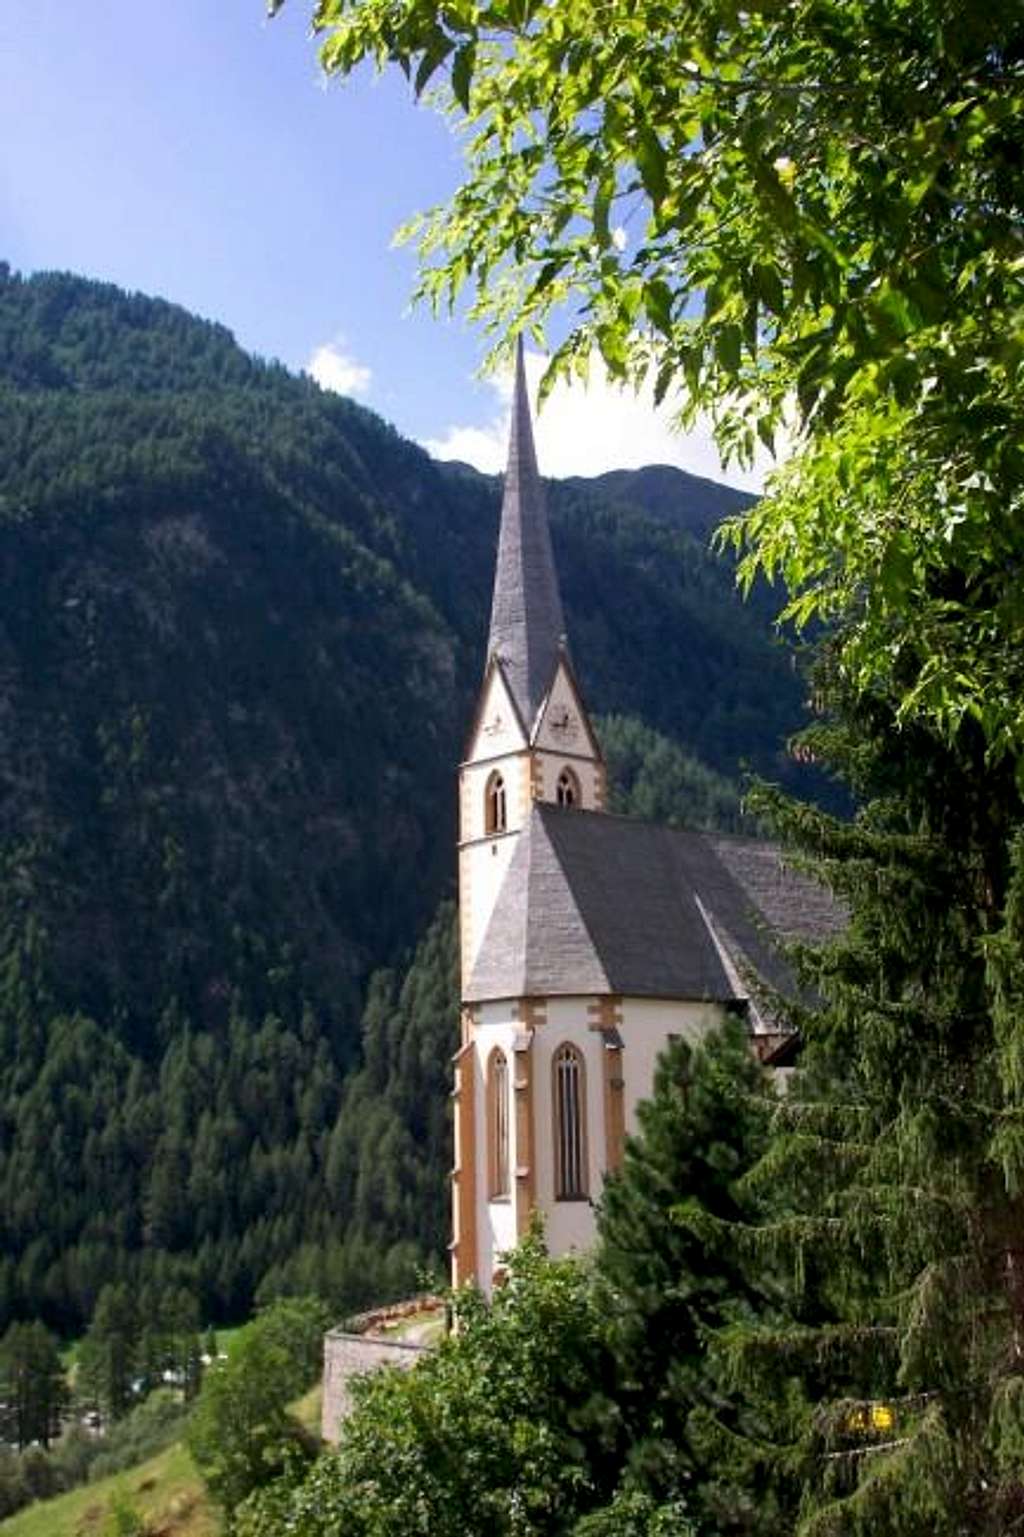 The Church of Heiligenblut.